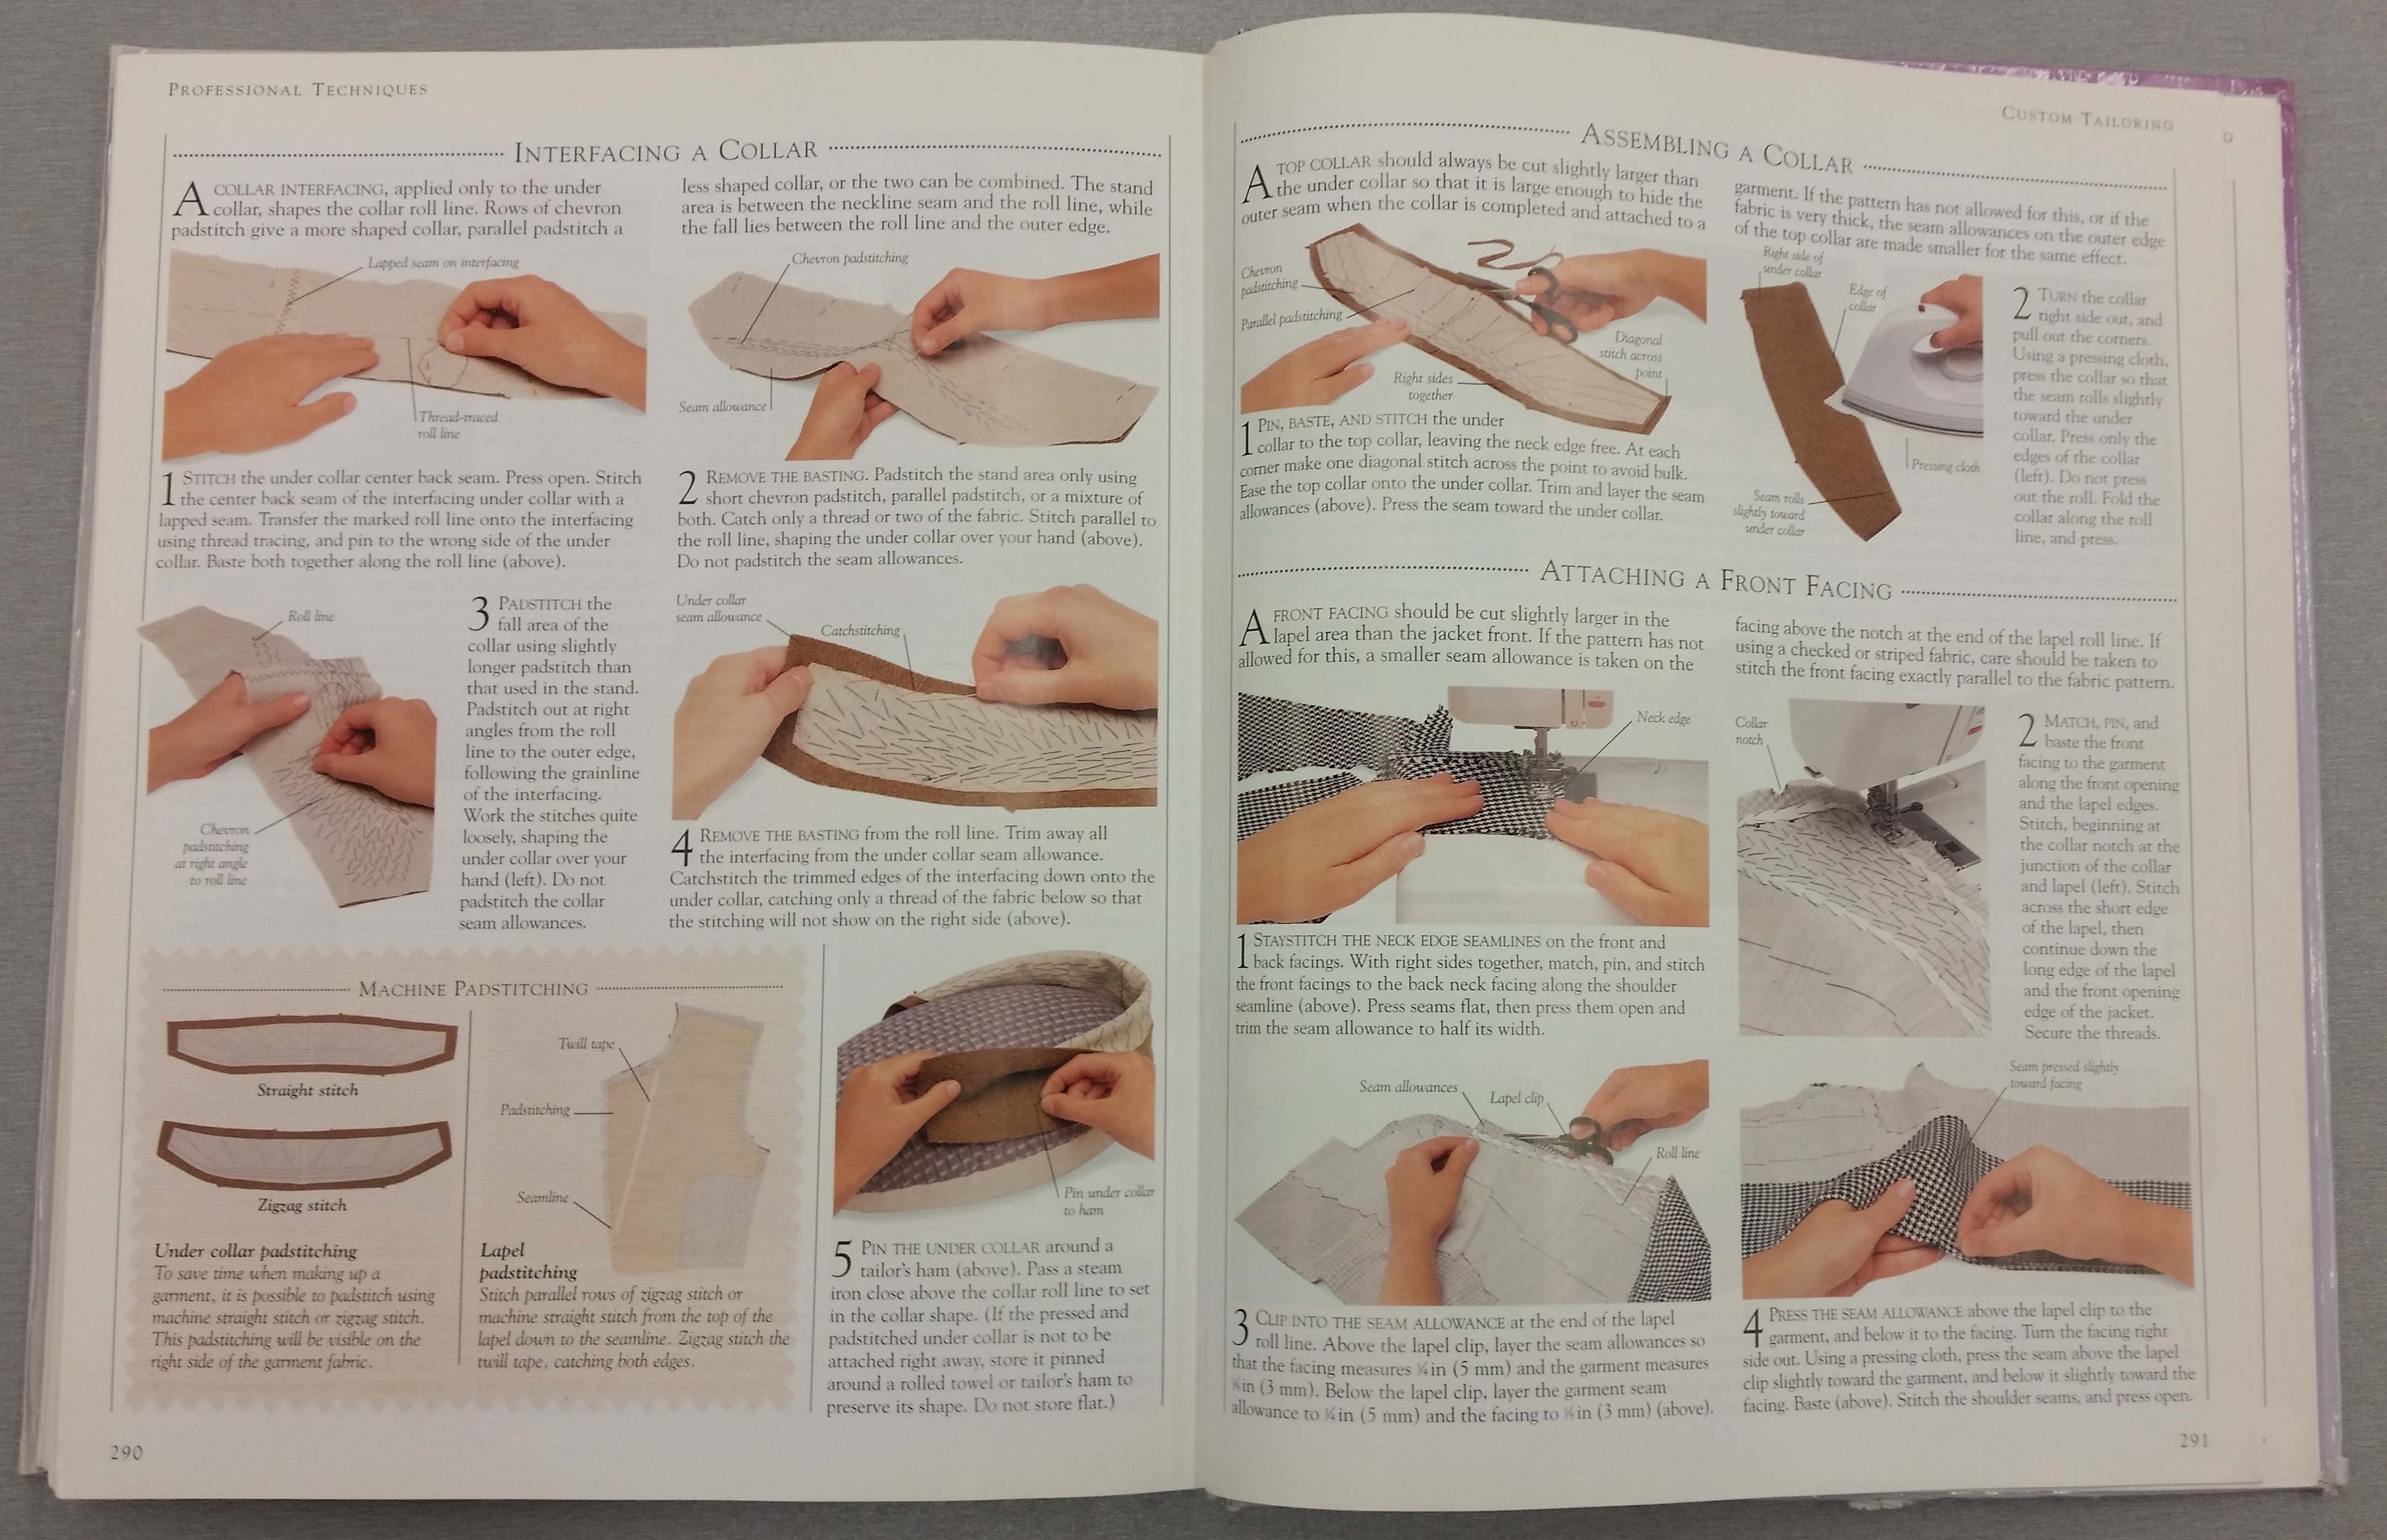 Spreak of padstitching collars from DK Complete Book of Sewing